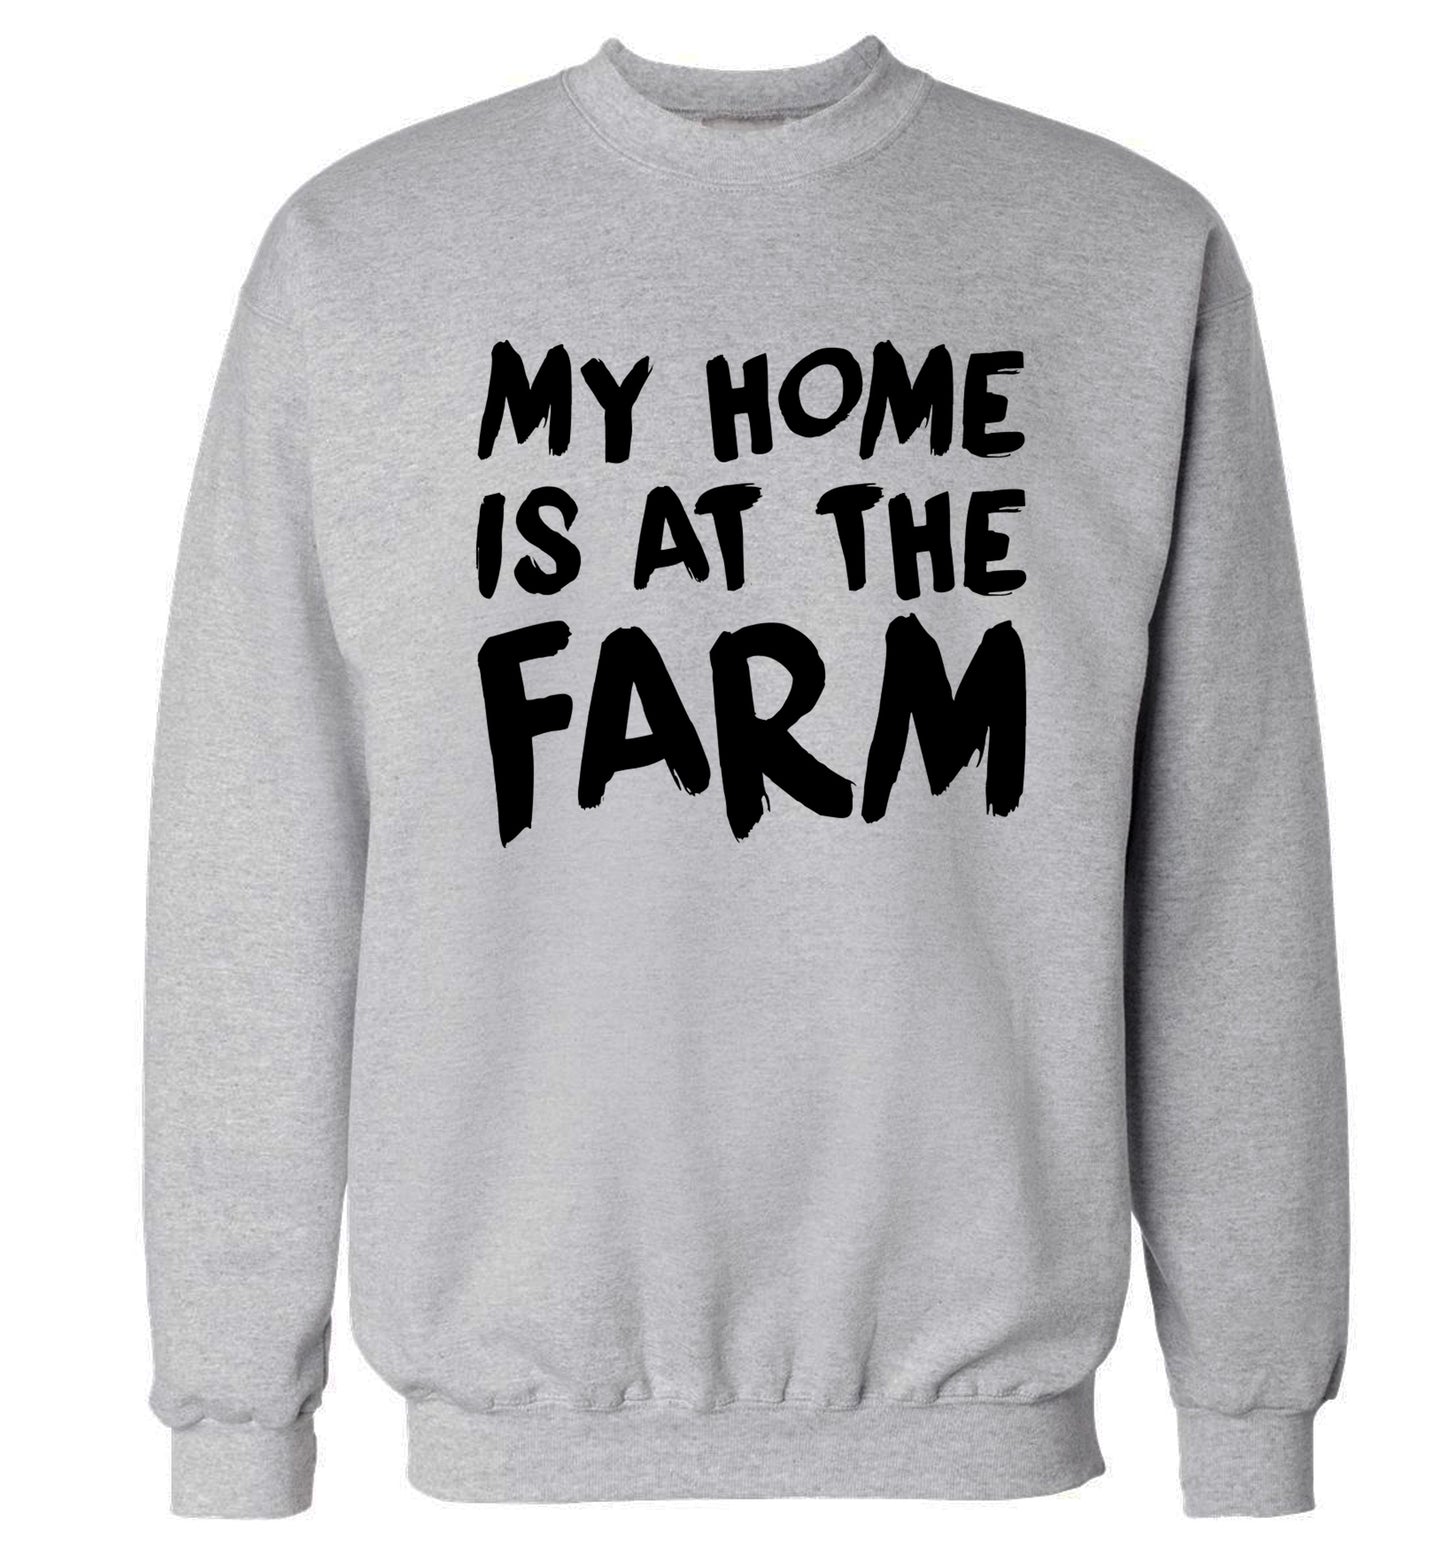 My home is at the farm Adult's unisex grey Sweater 2XL